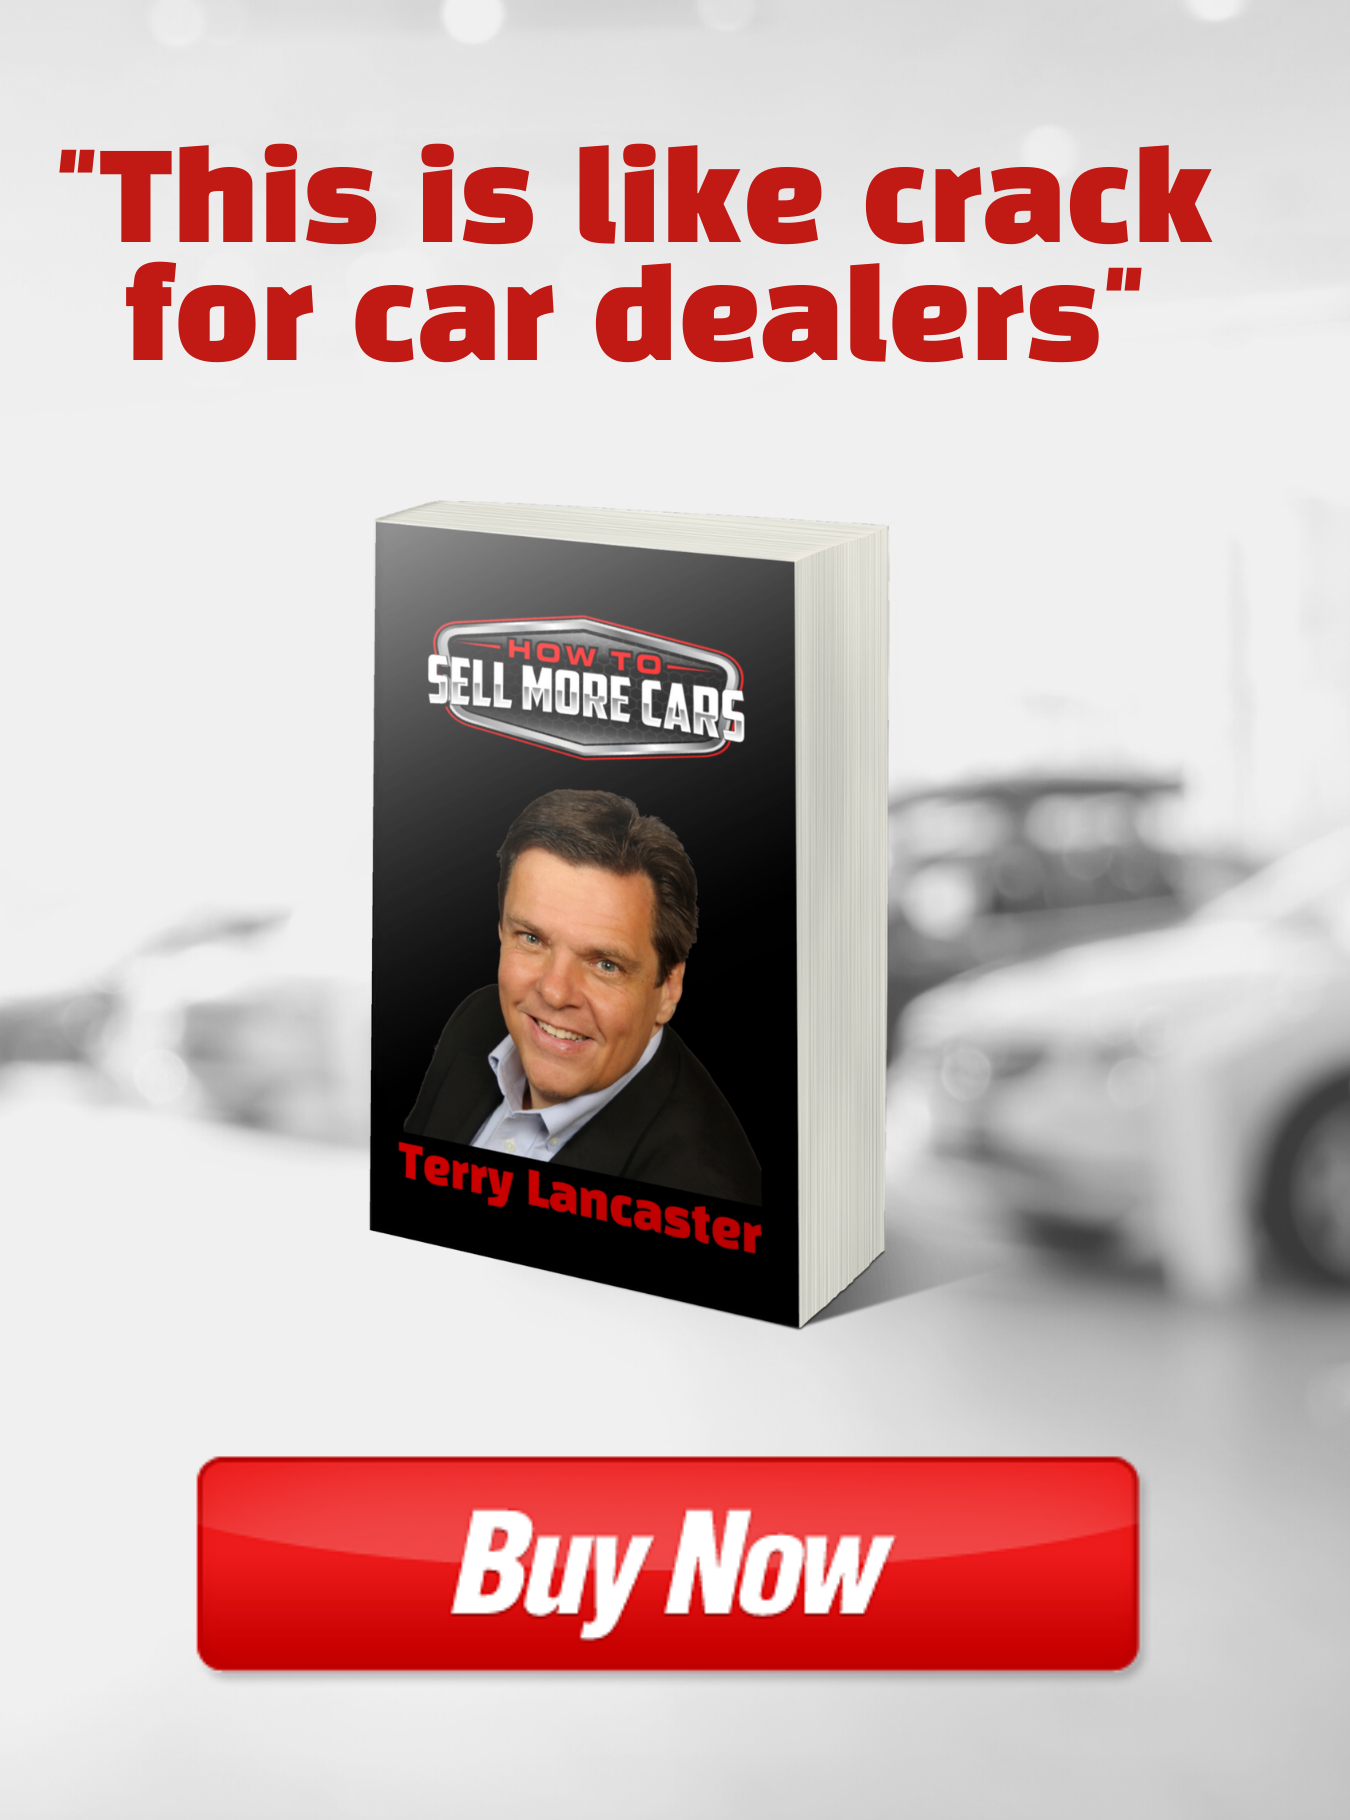 How to sell more cars book by terry lancaster on amazon